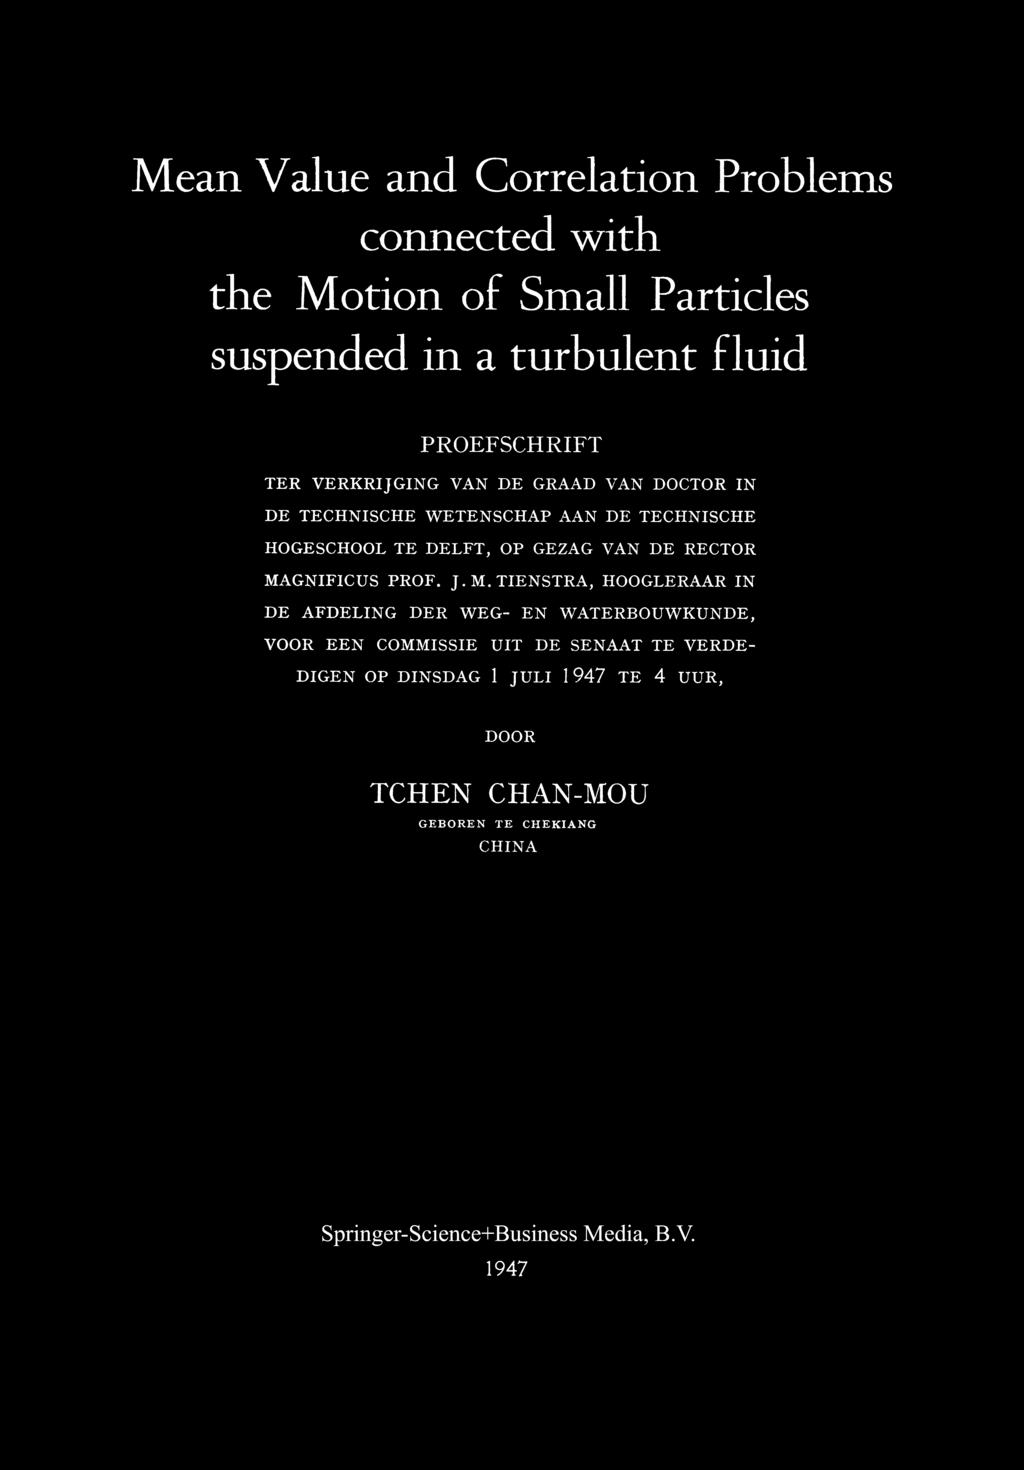 Mean Value and Correlation Problems connected with the Motion of Small Particles suspended in a turbulent fluid PROEFSCHRIFT